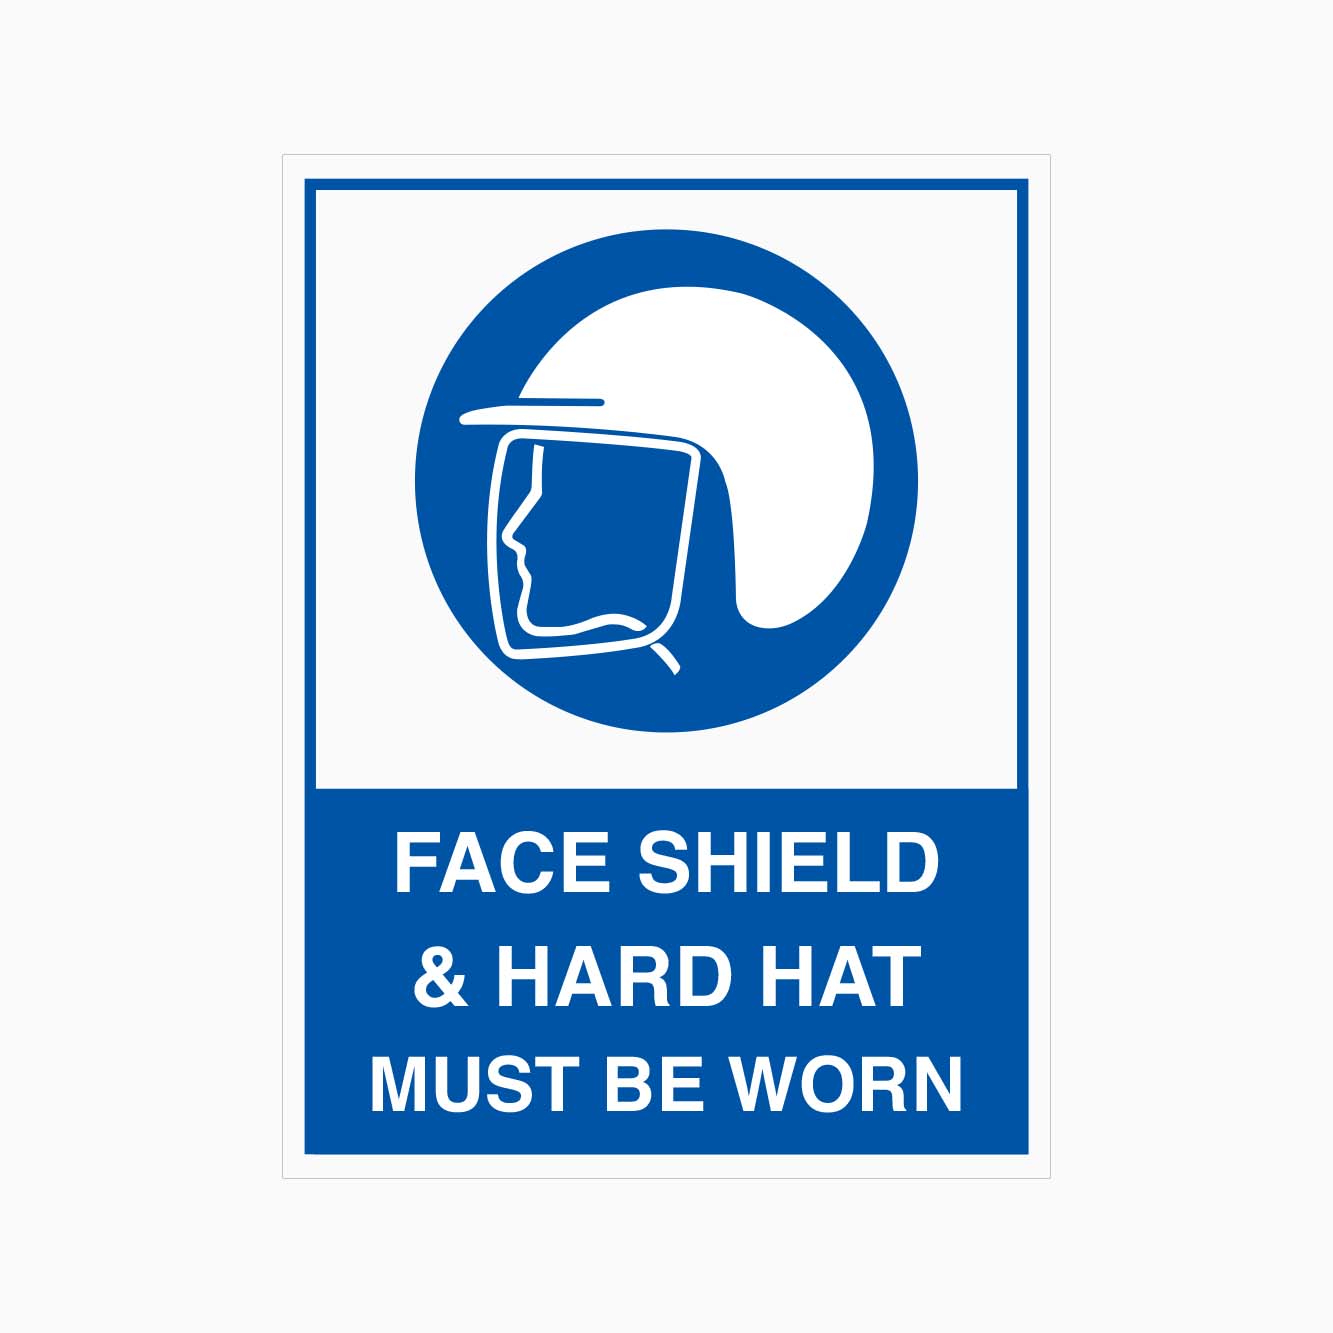 FACE SHIELD & HARD HAT MUST BE WORN SIGN - GET SIGNS